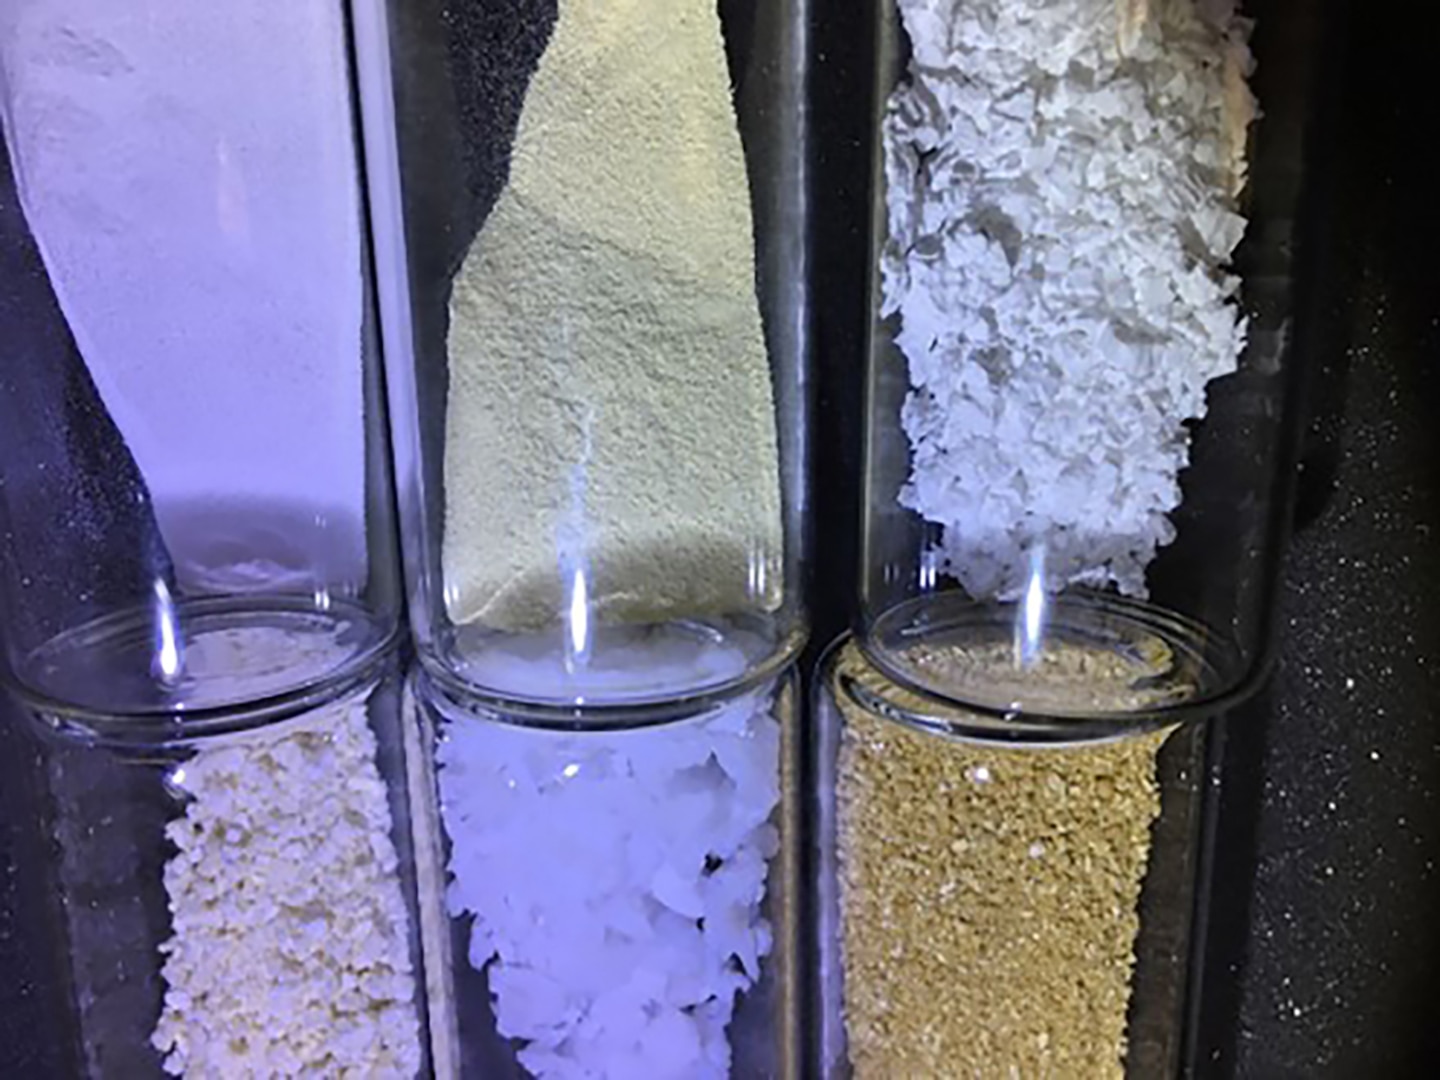 High-purity stabilized ceramic powders are produced by a chemical synthesis method. The powders yield a rare-earth-based ceramic thermal barrier coating made from yttria-stabilized zirconia, which DLA uses to achieve heat resistance and thermal control in jet engines and in the space program.